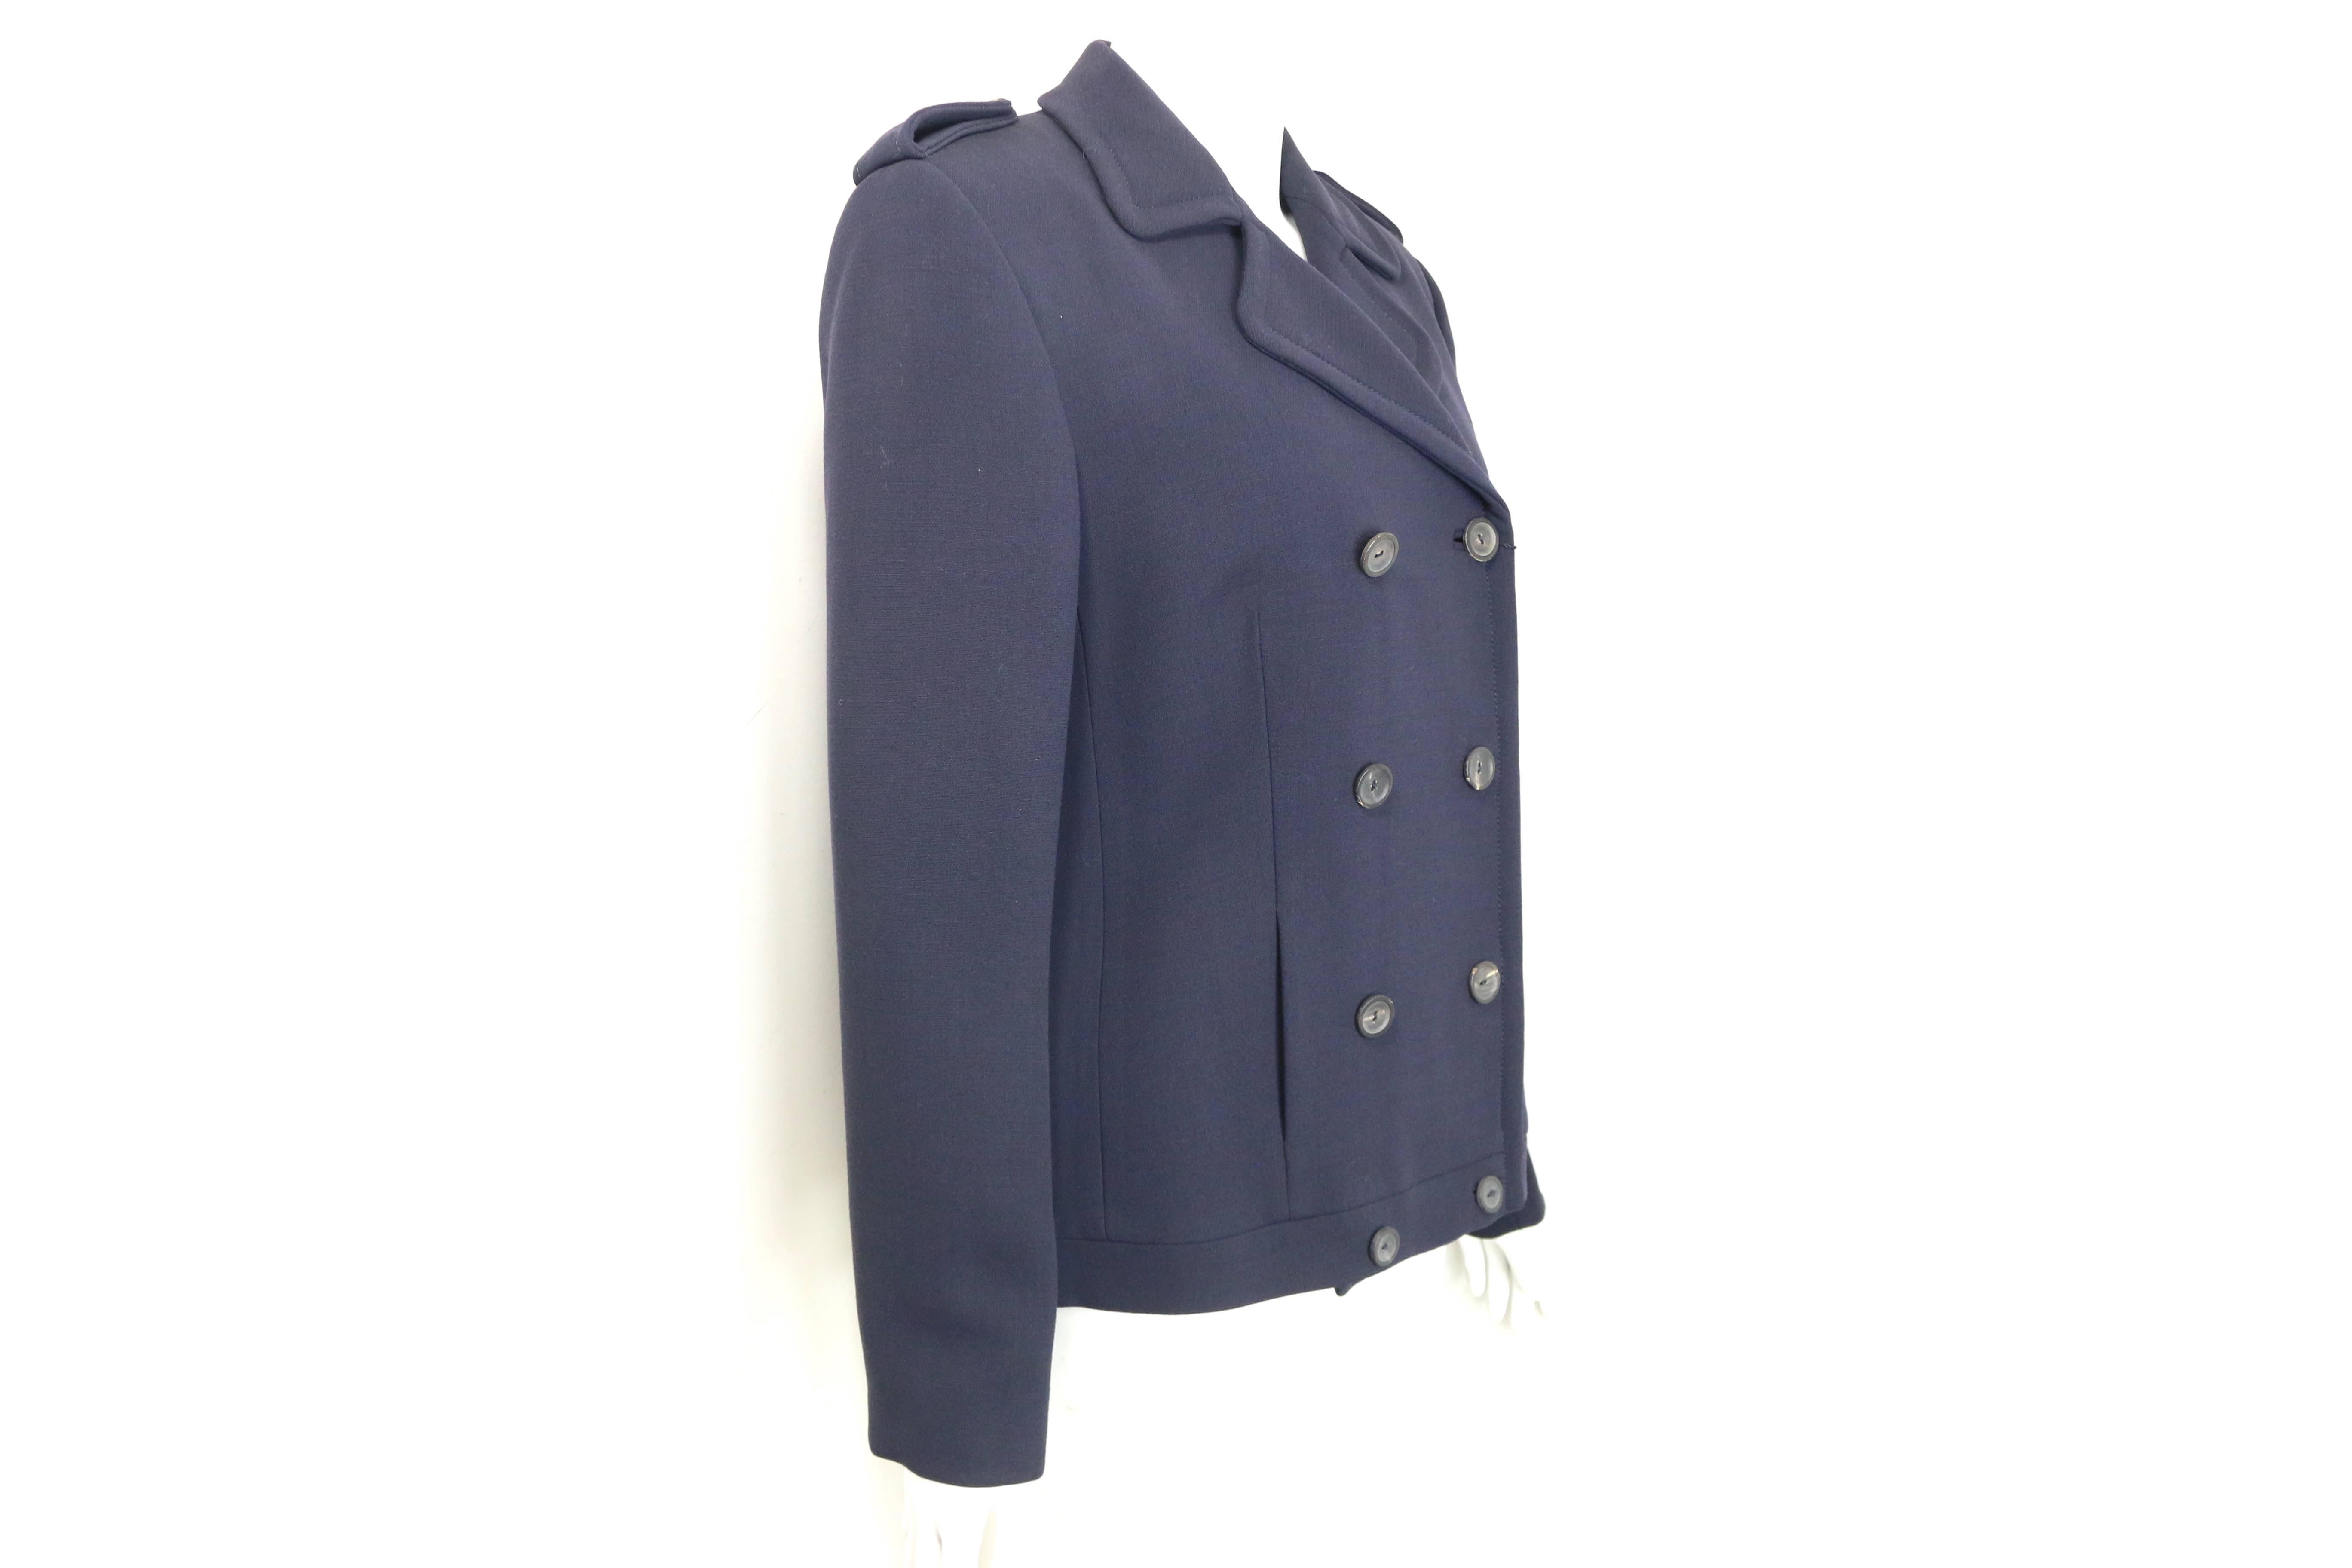 - Gucci by Tom Ford navy wool double breasted jacket from Fall 1996 collection. 

- Epaulette Shoulders. 

- Eight front buttons closure. 

- Size 44. 

- 100% Wool. 

